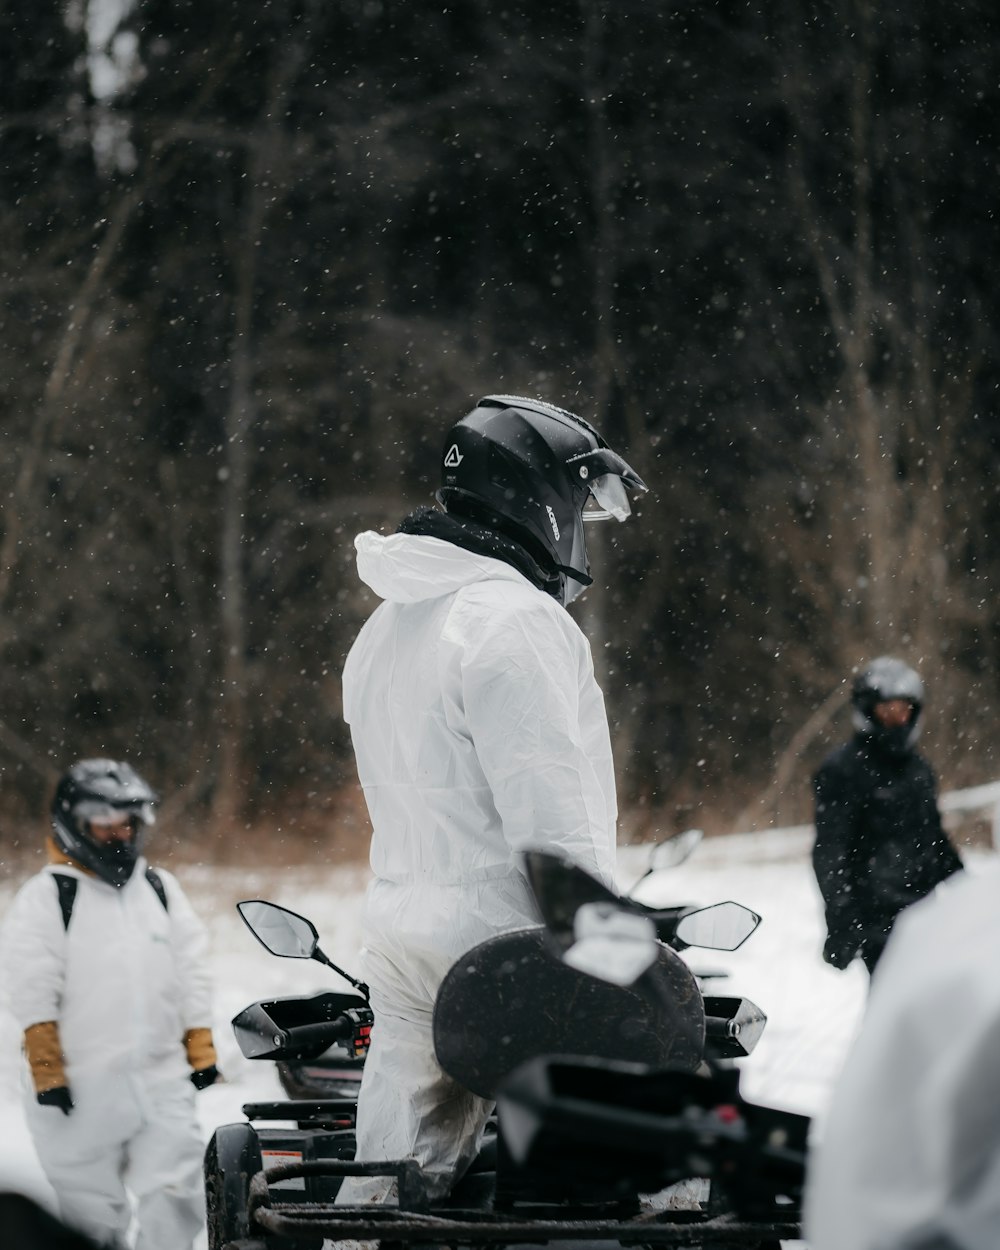 a person in a white suit and helmet on a motorcycle